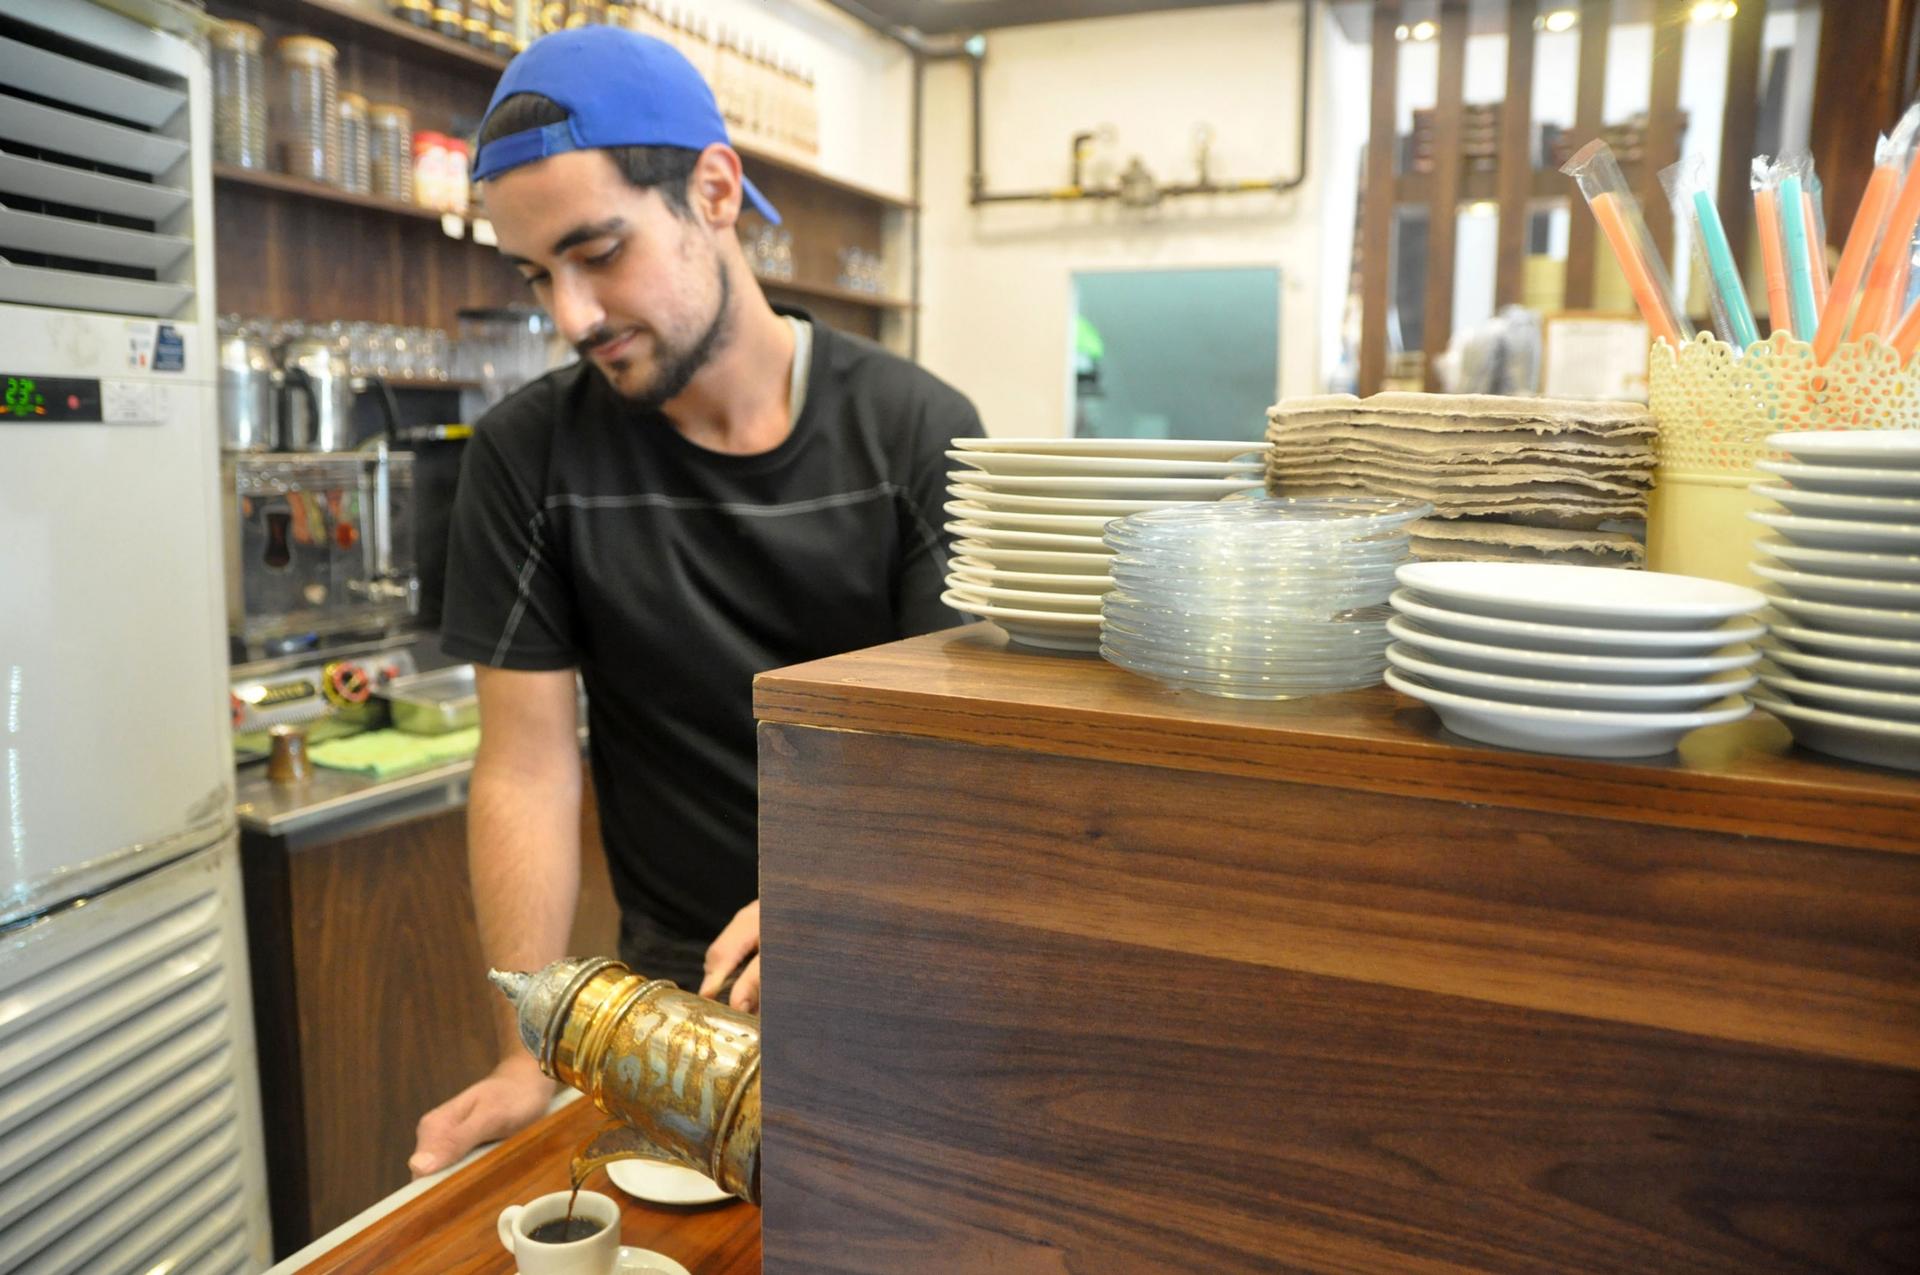 A worker pours a cup of strong coffee at a Syrian sweet shop in Istanbul. Unemployment rates in Turkey are high, and the pandemic affected Syrian workers particularly severely. 